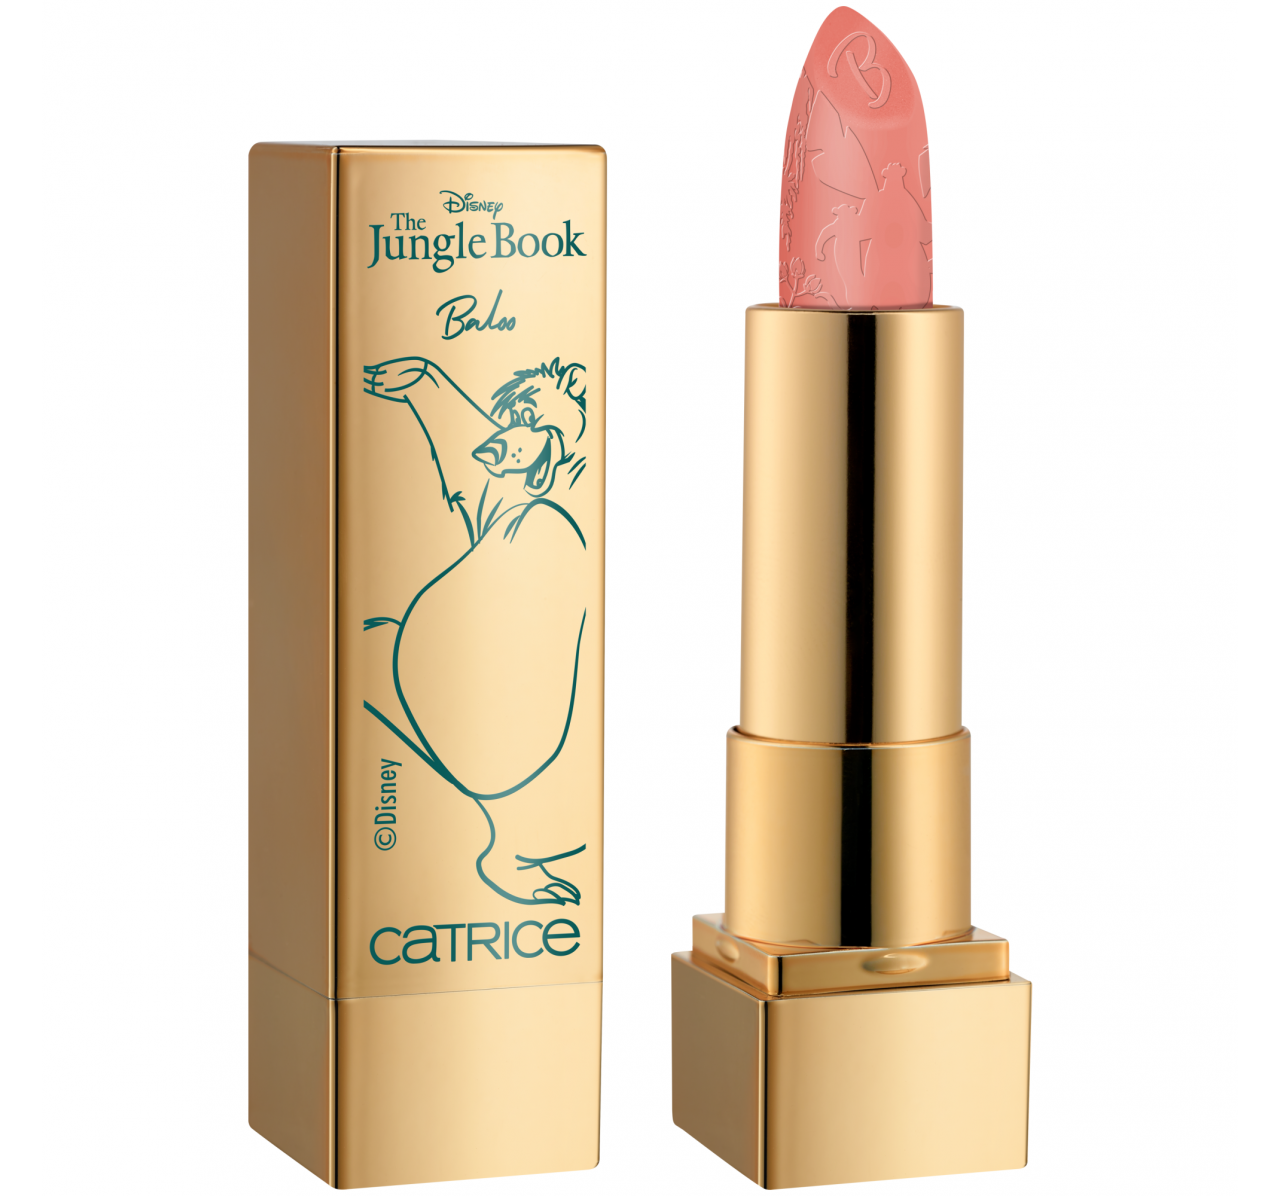 Catrice Disney The Jungle Book With 3g 010 The Flow Balm Lip Go